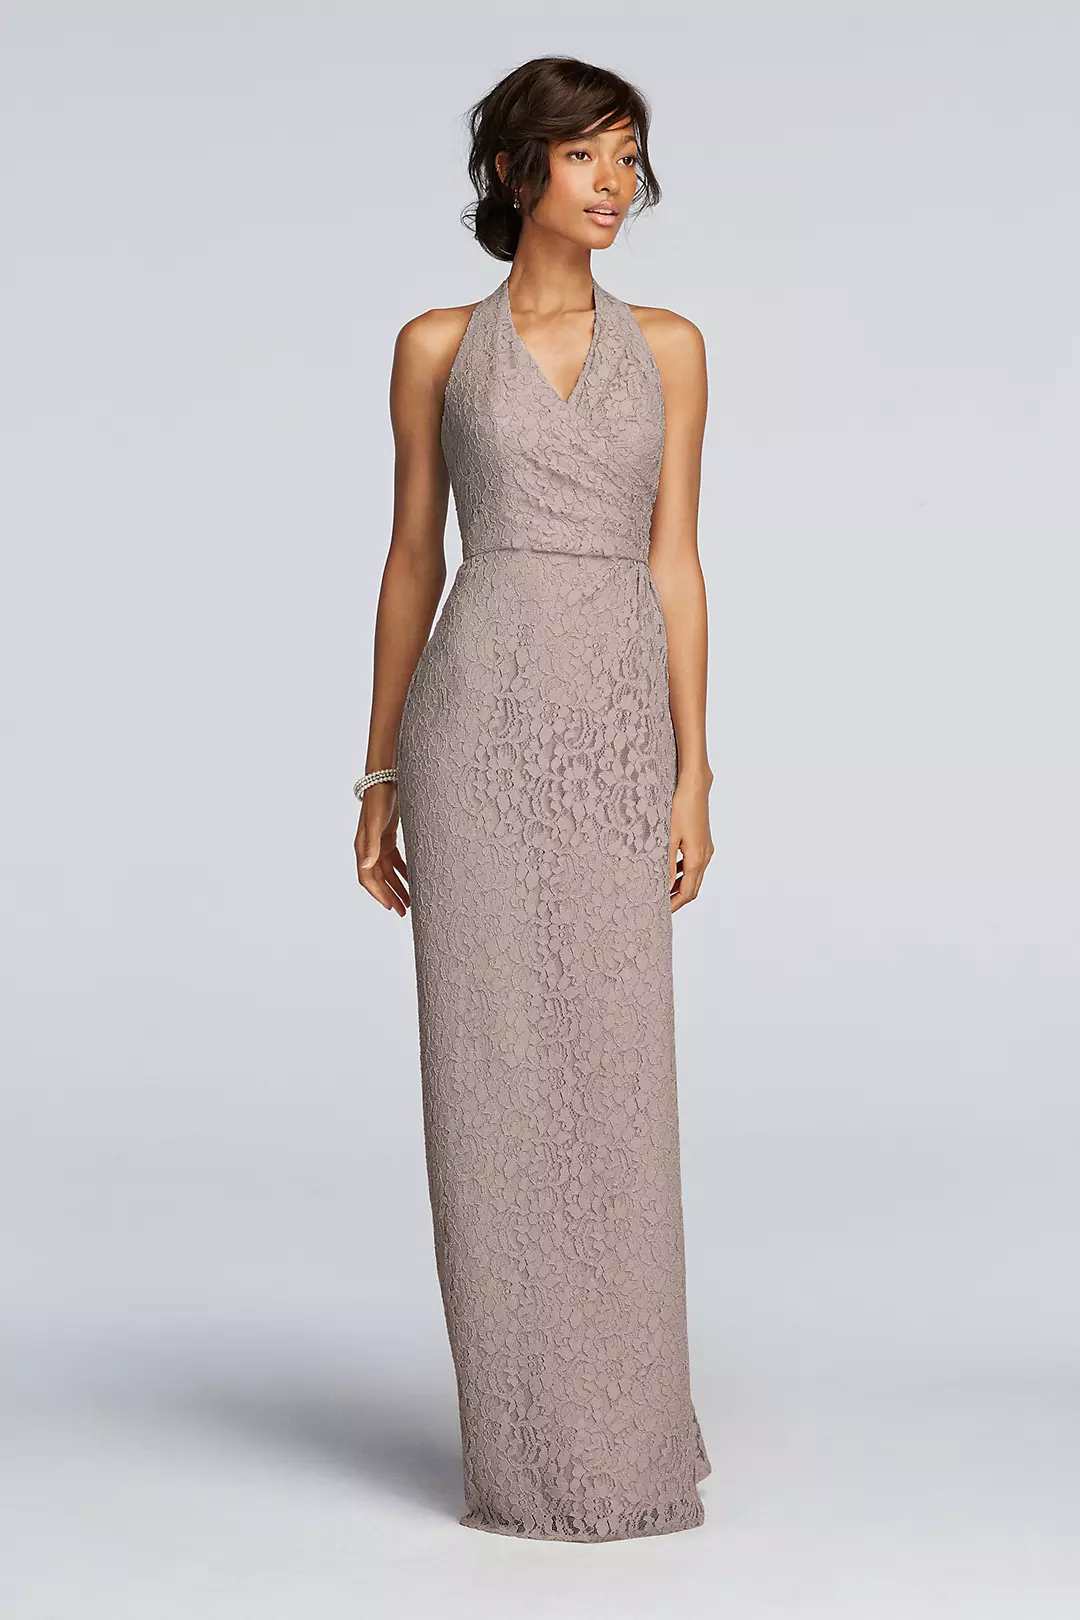 All Over Lace Halter Sheath Dress Image